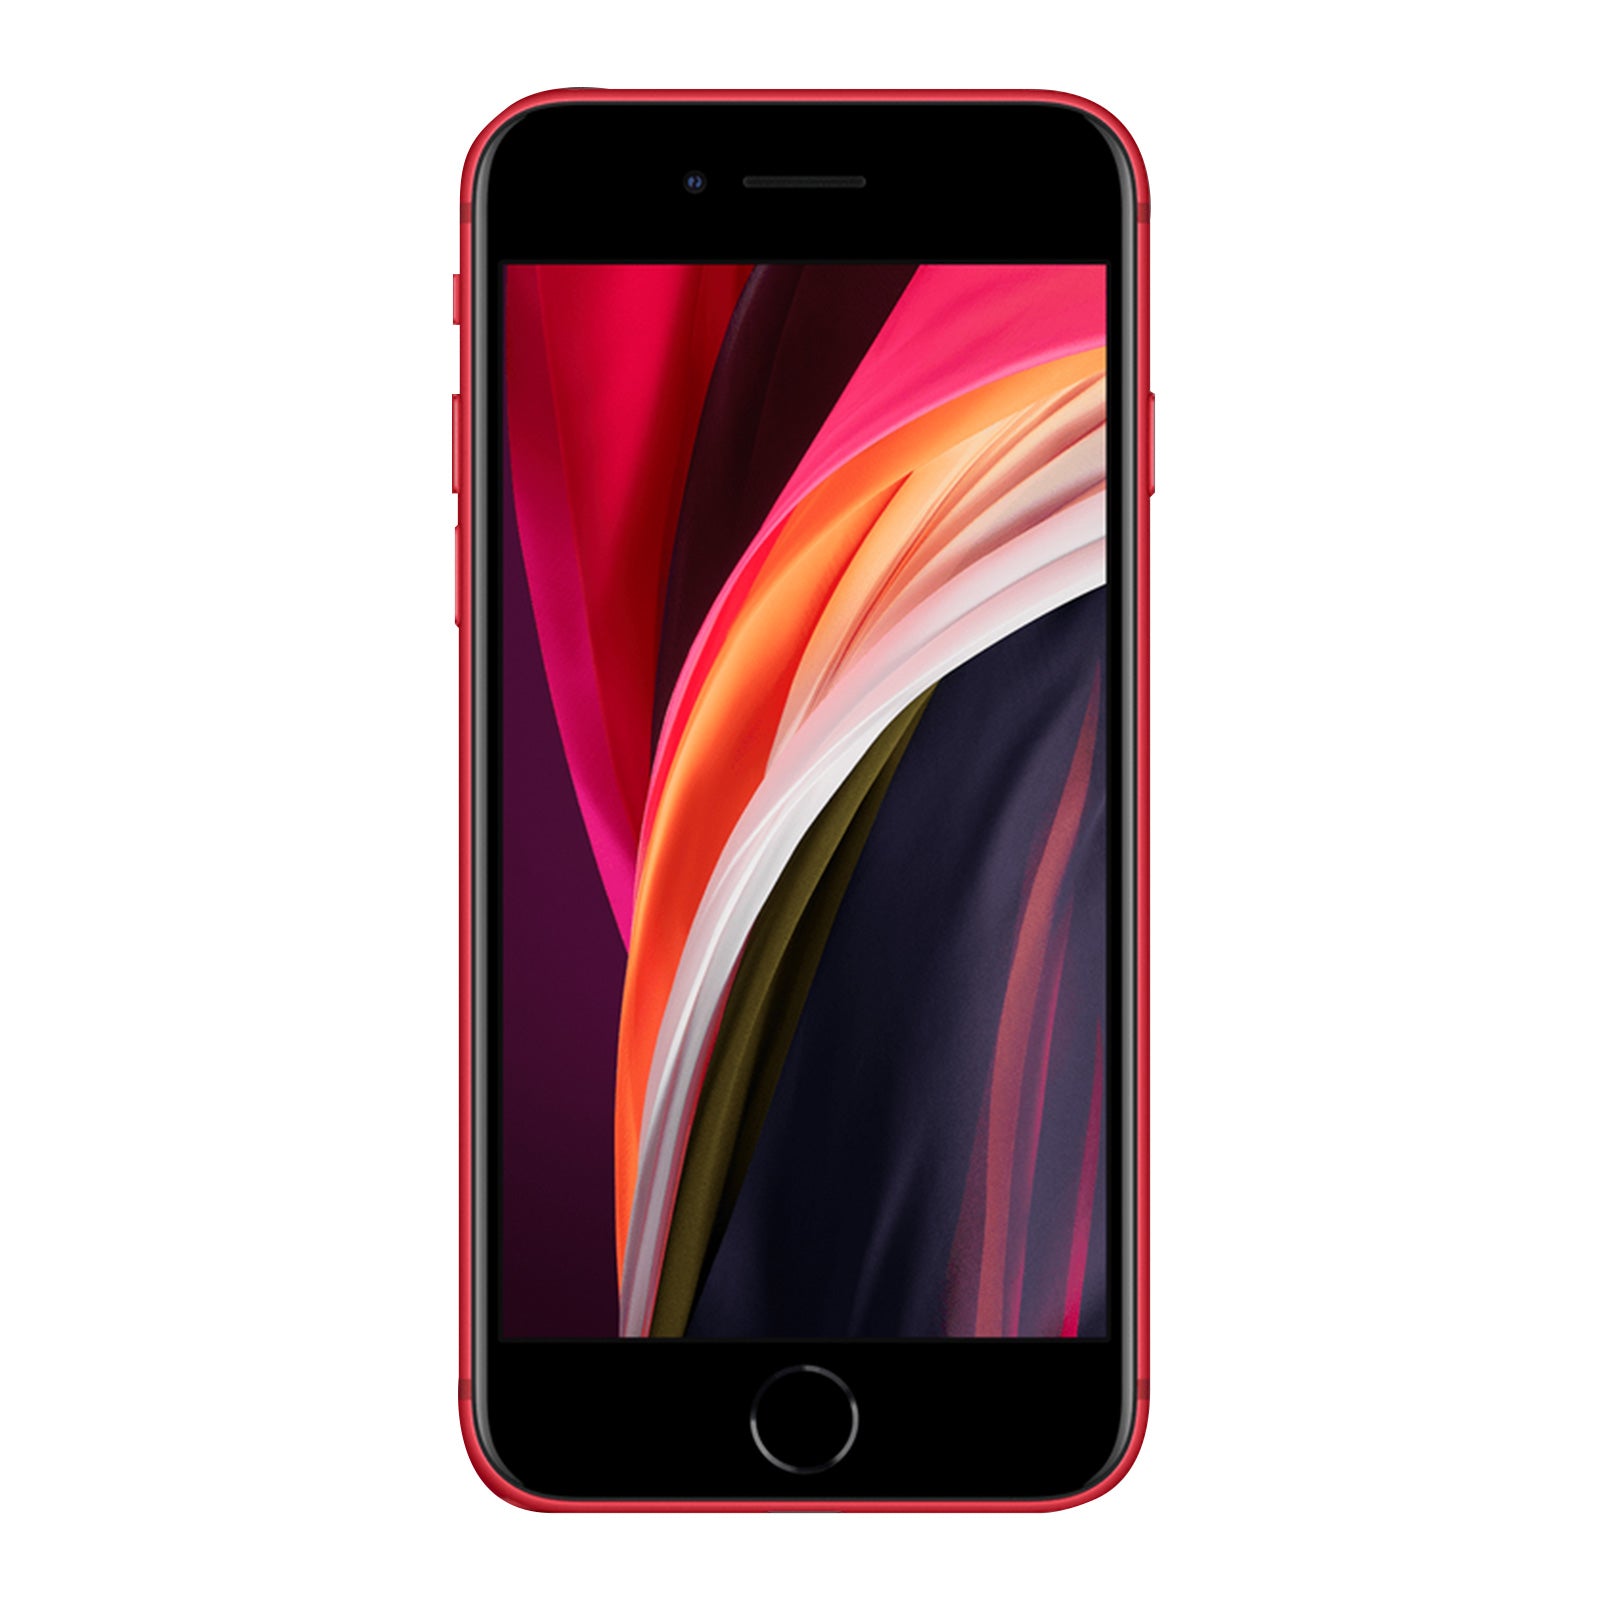 Apple iPhone SE 2nd Gen 64GB Product Red Good T-Mobile